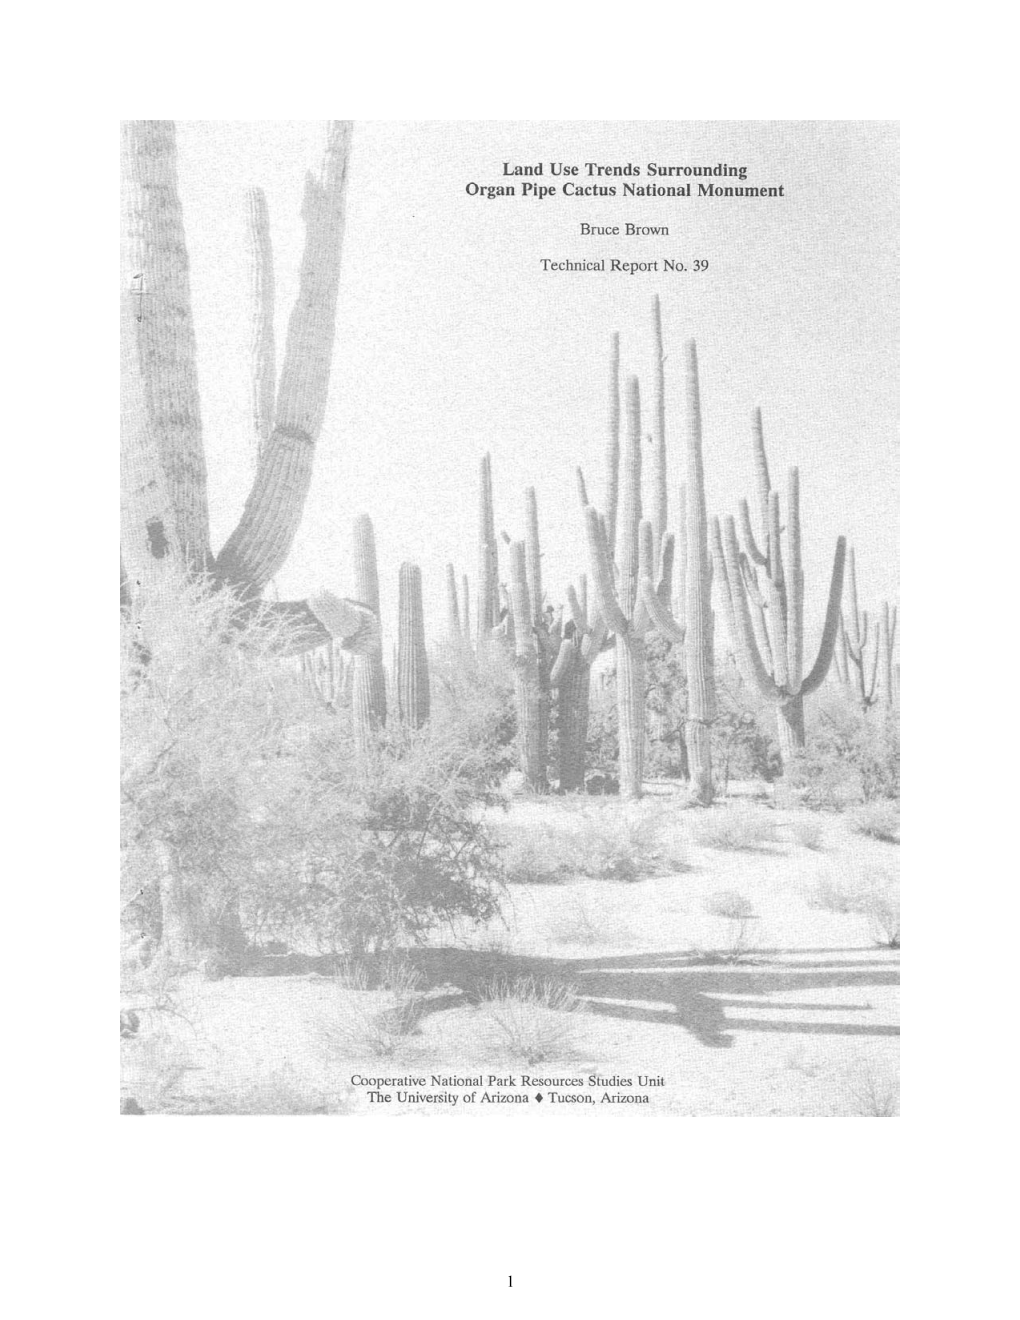 Land Use Trends Surrounding Organ Pipe Cactus National Monument